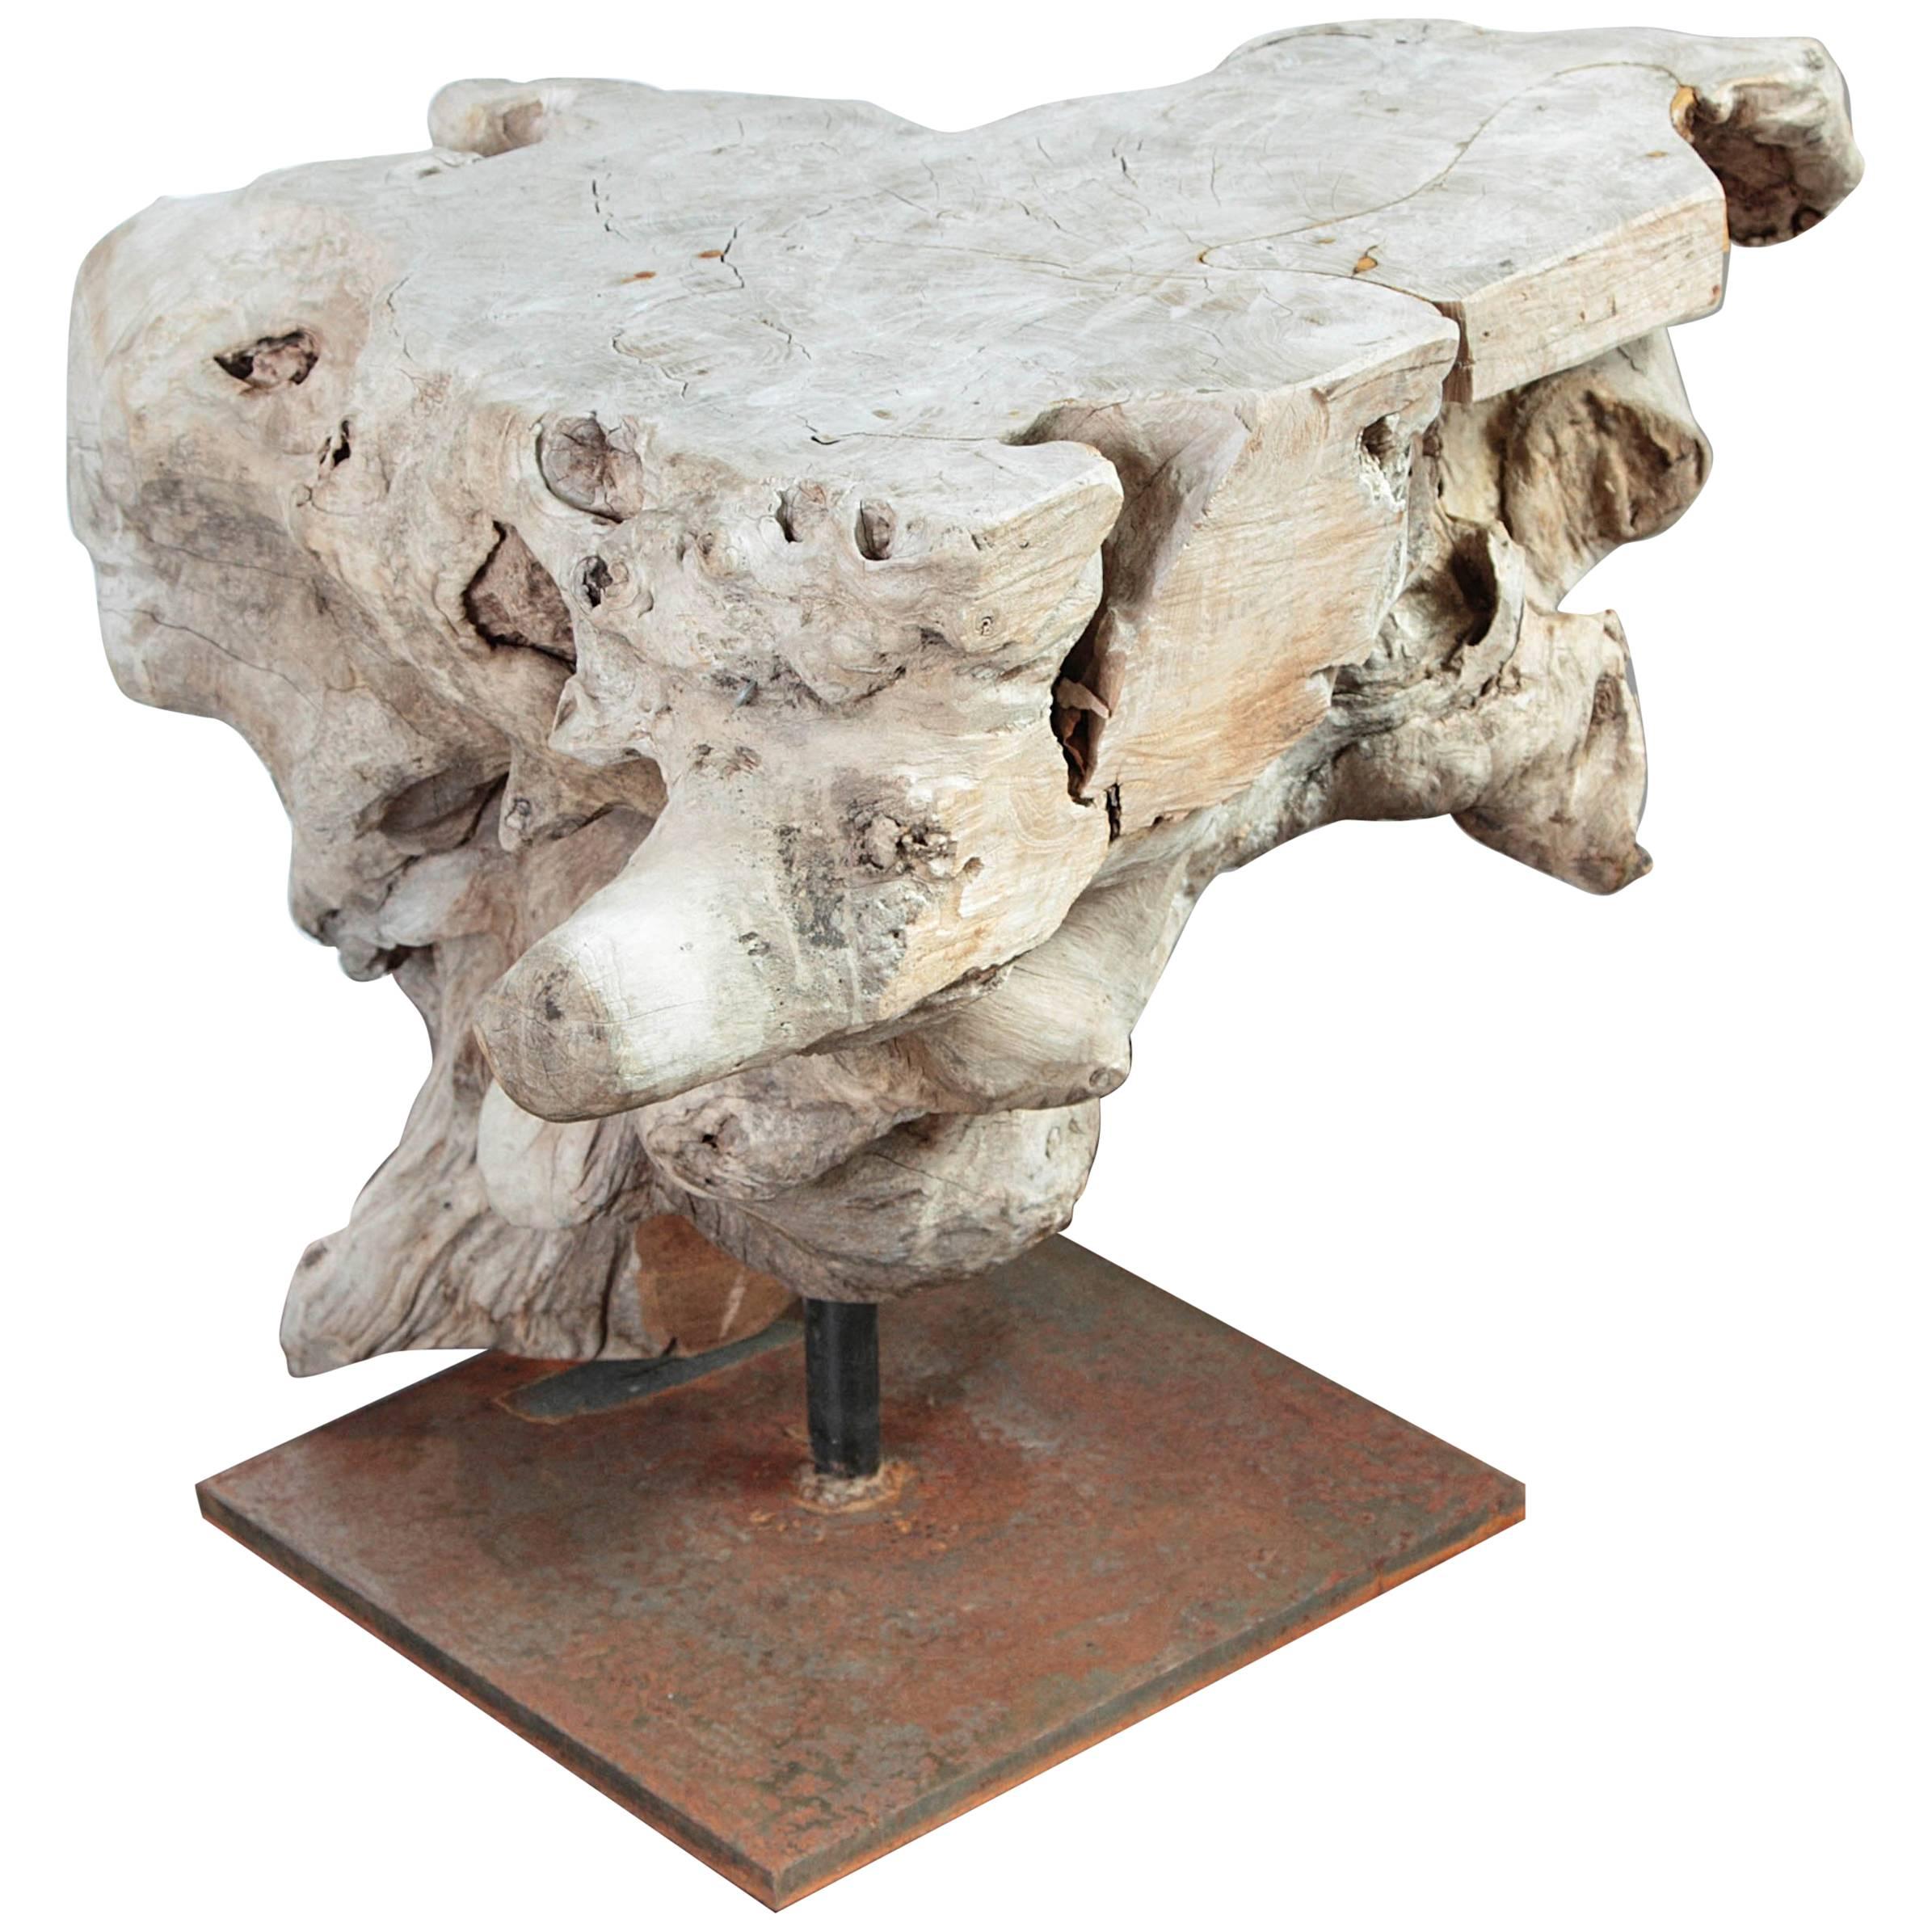 Organic form teak end table
Organic bleached teak end table and mounted on a custom steel base
Can be used as an end table, side table or decorative organic sculpture.
Indoor or outdoor.
Teak is a weather and bug resistant hard wood.